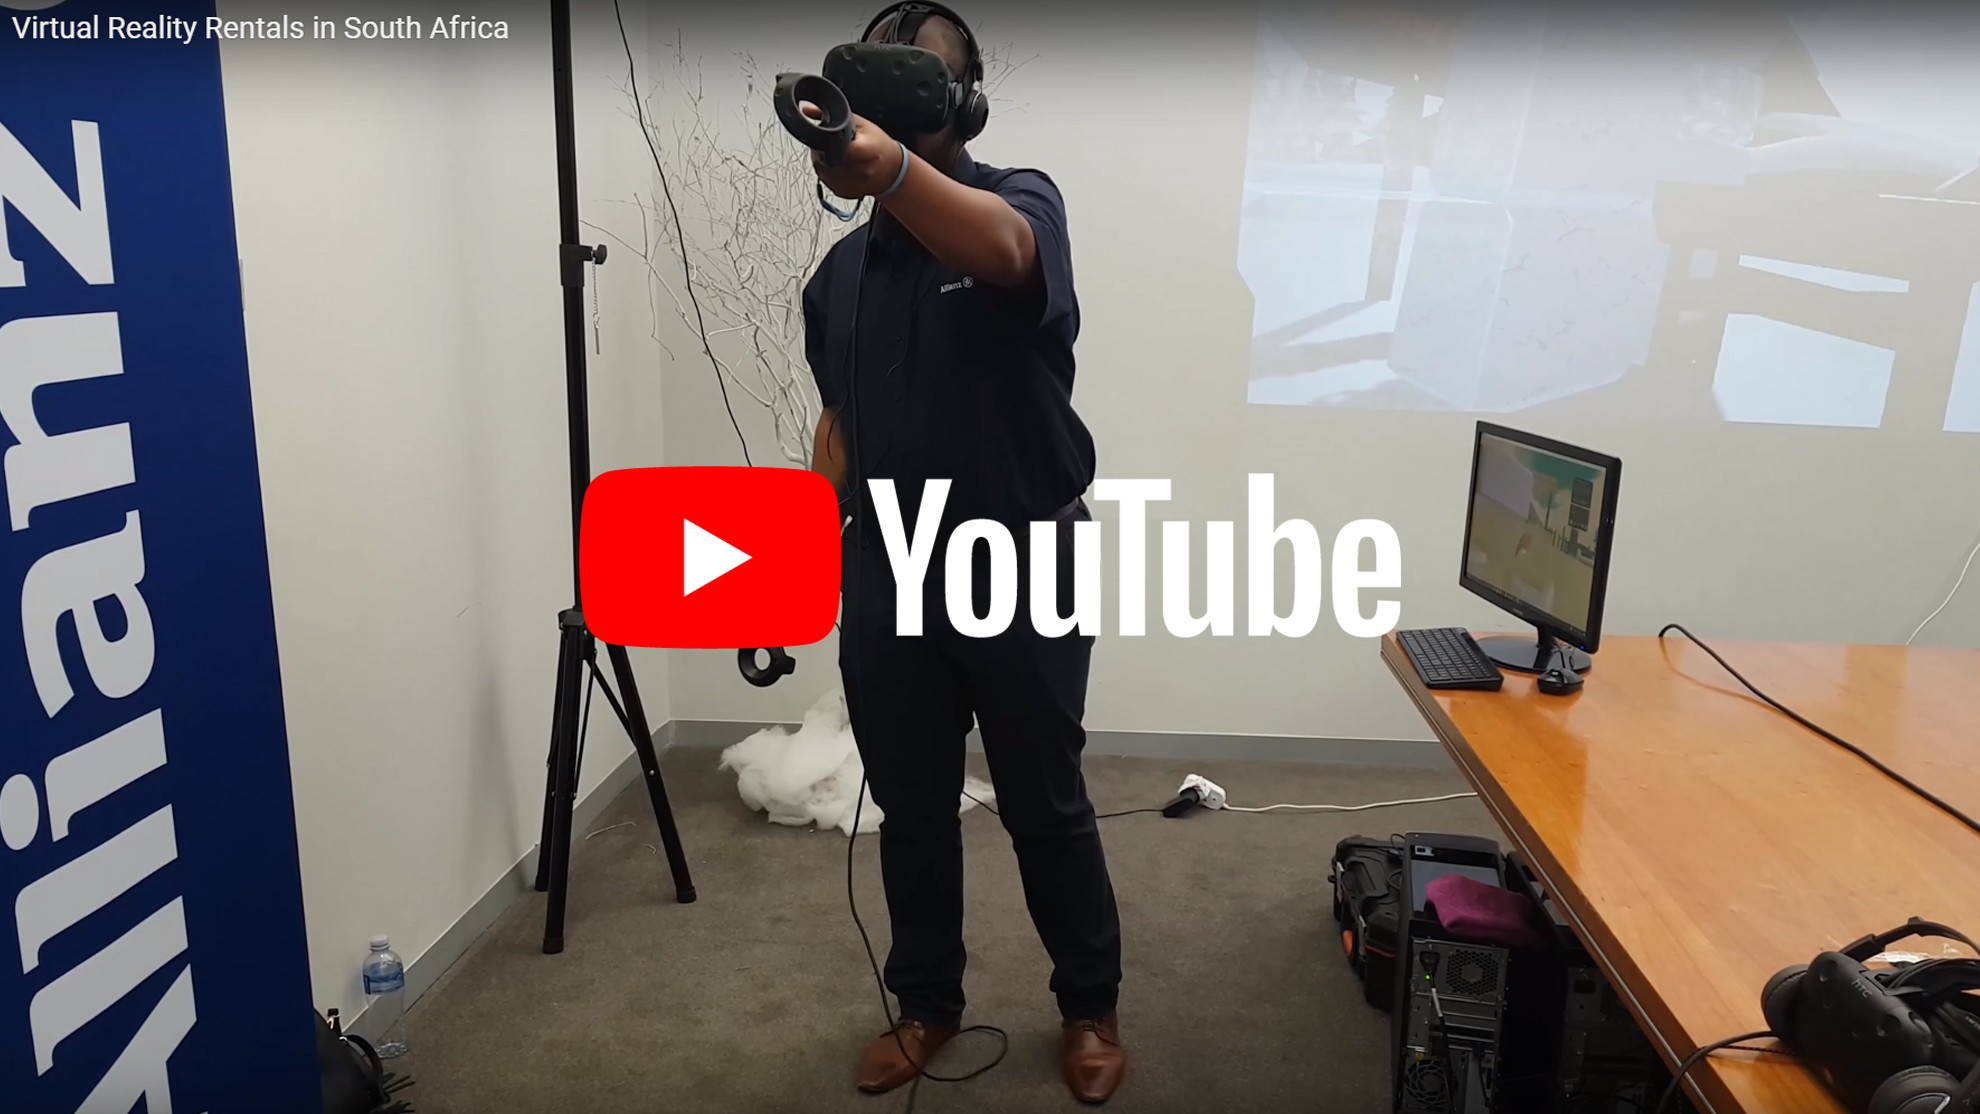 Video of a Virtual Reality Event